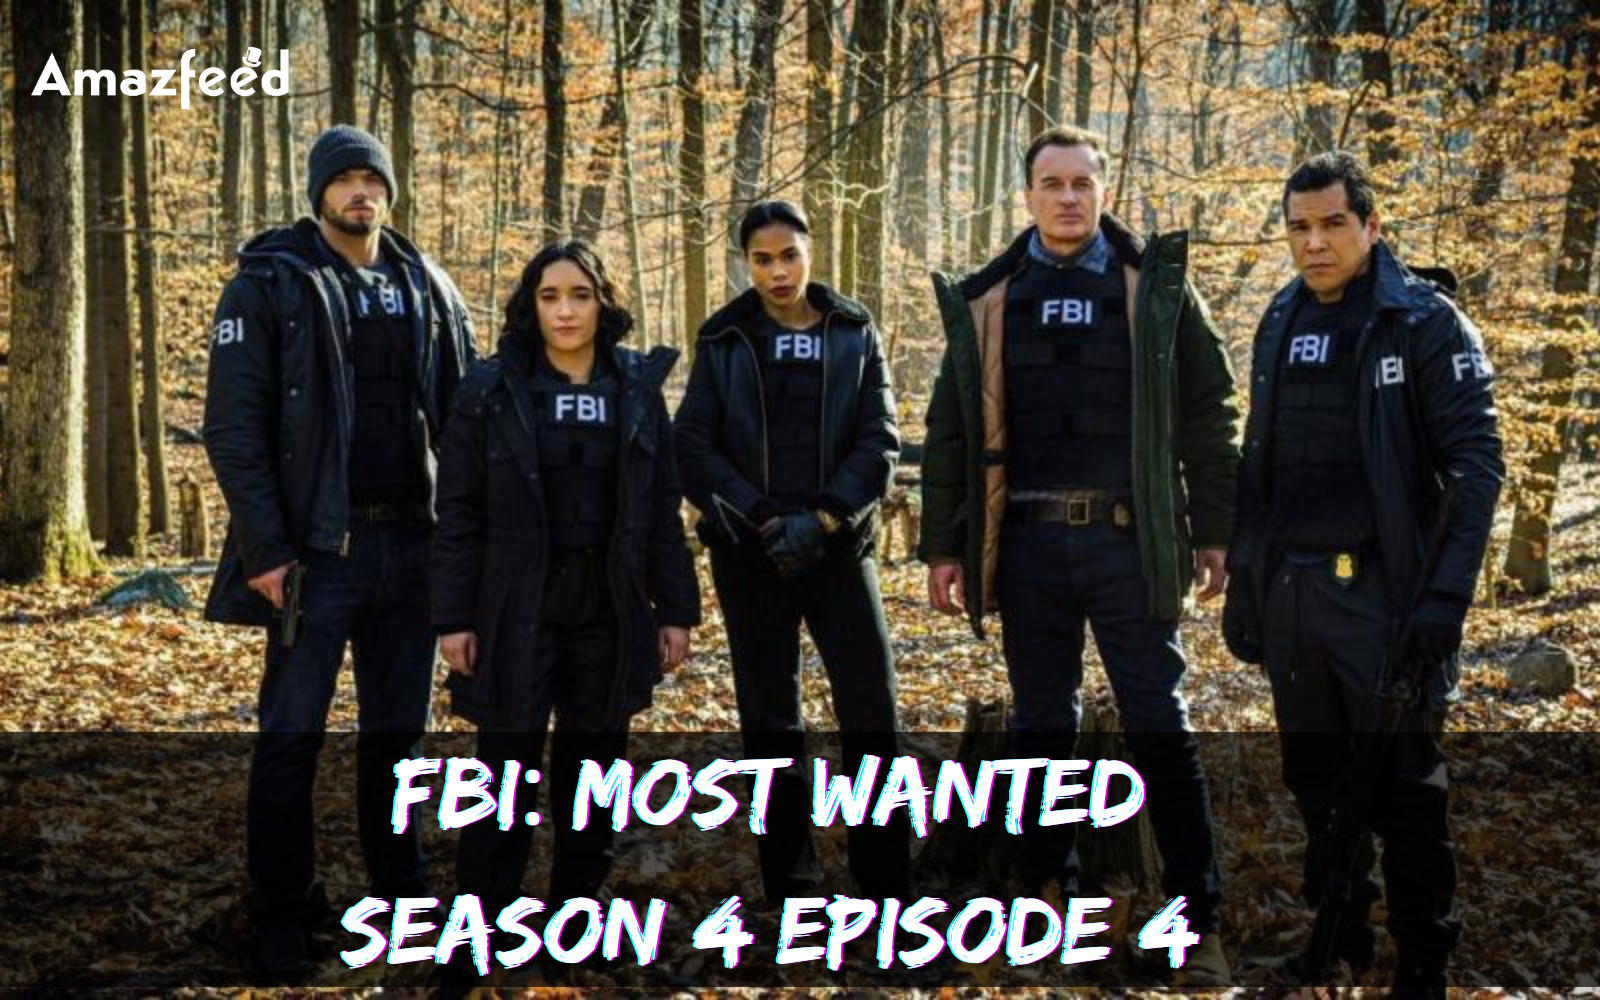 Is There Any News “FBI Most Wanted Season 4 Episode 4” Trailer